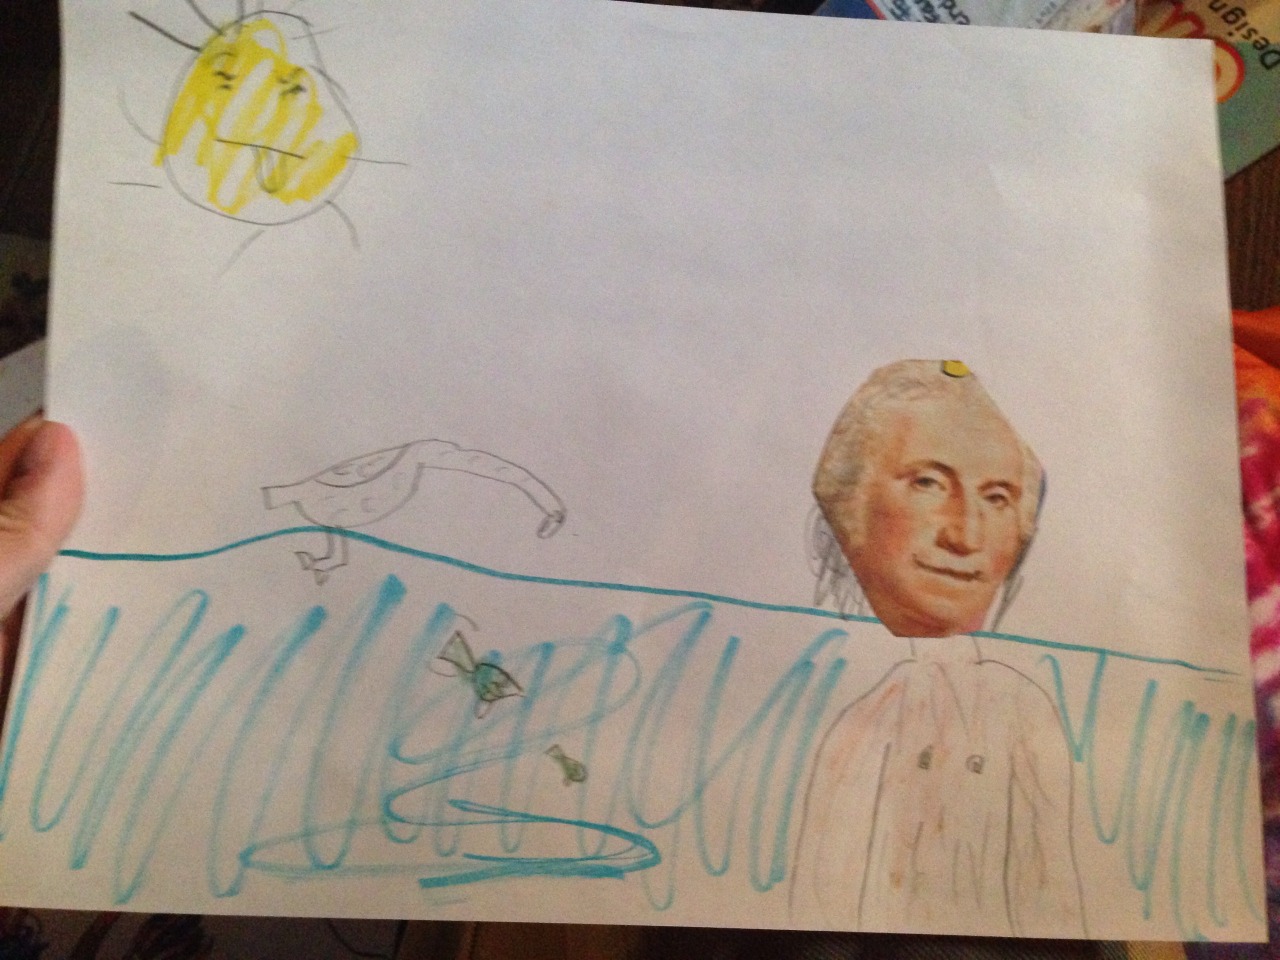 glumshoe:
“kaijutegu:
“glumshoe:
“afrosarah:
“glumshoe:
“afrosarah:
“afrosarah:
“glumshoe:
“Yeah, just some childhood art of George Washington skinny-dipping in a river with a goose. No biggie.
”
I’m losing my mind because I have a pic so similar to...